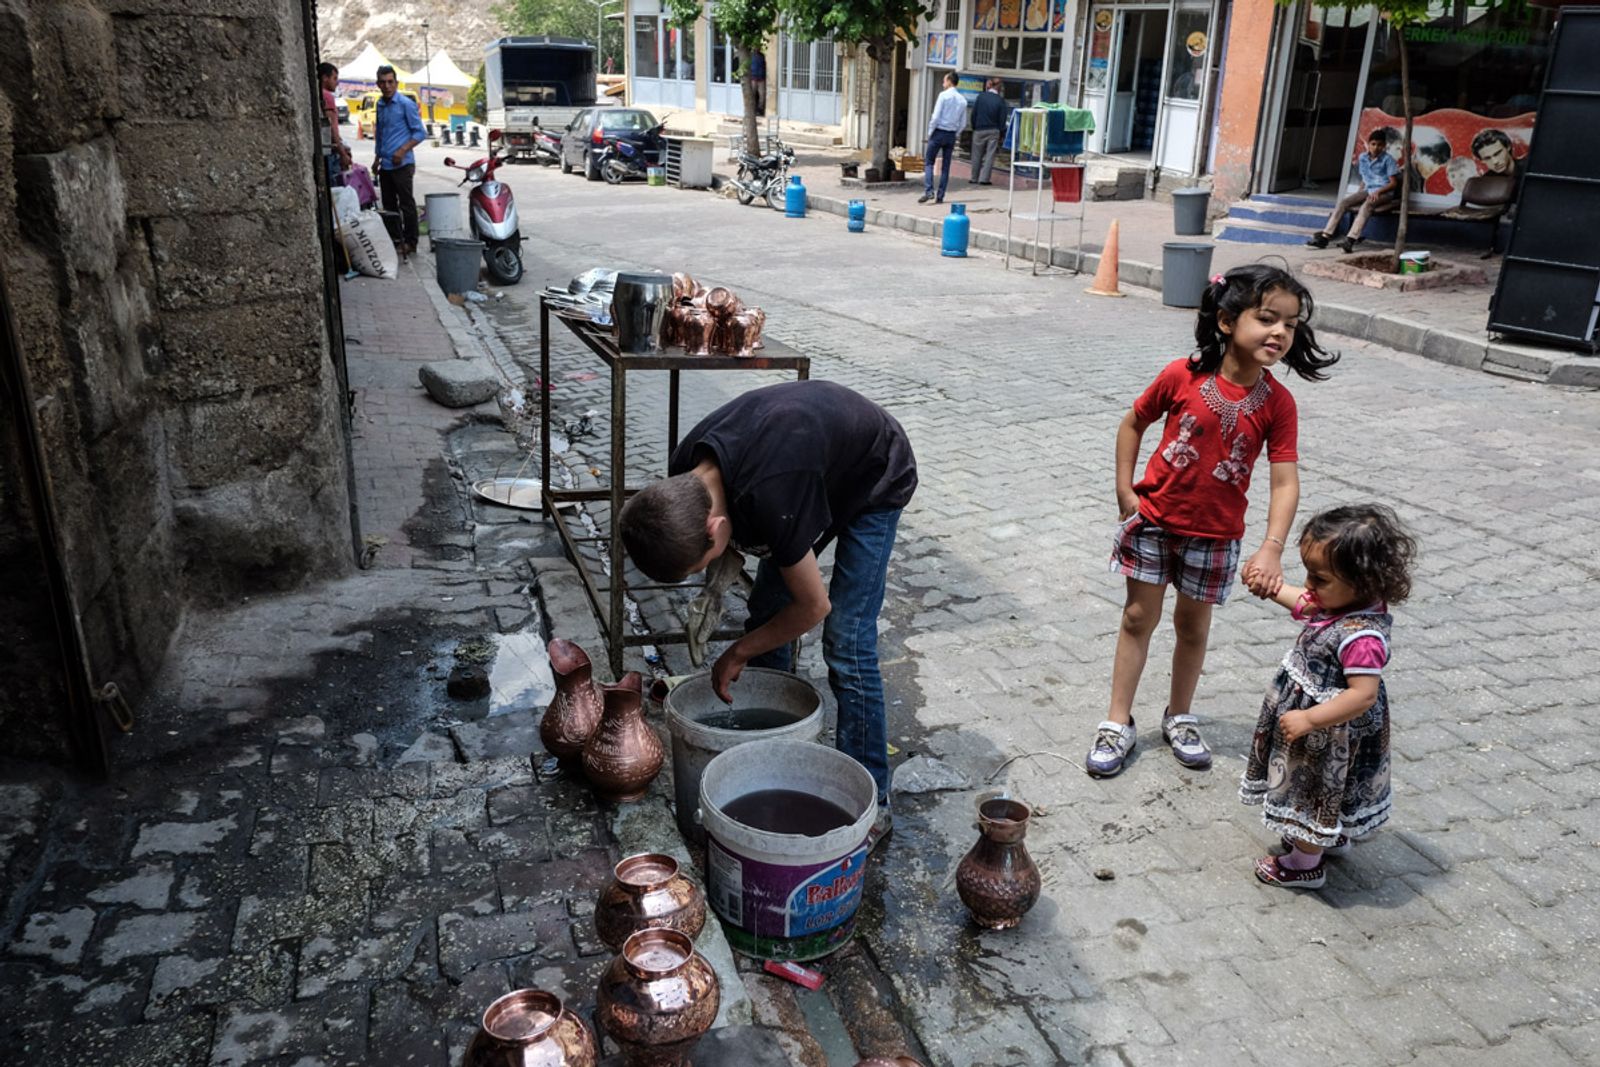 © Valerio Muscella - A kid is seen working while washing pots. Gaziantep, Turkey. May 2016.